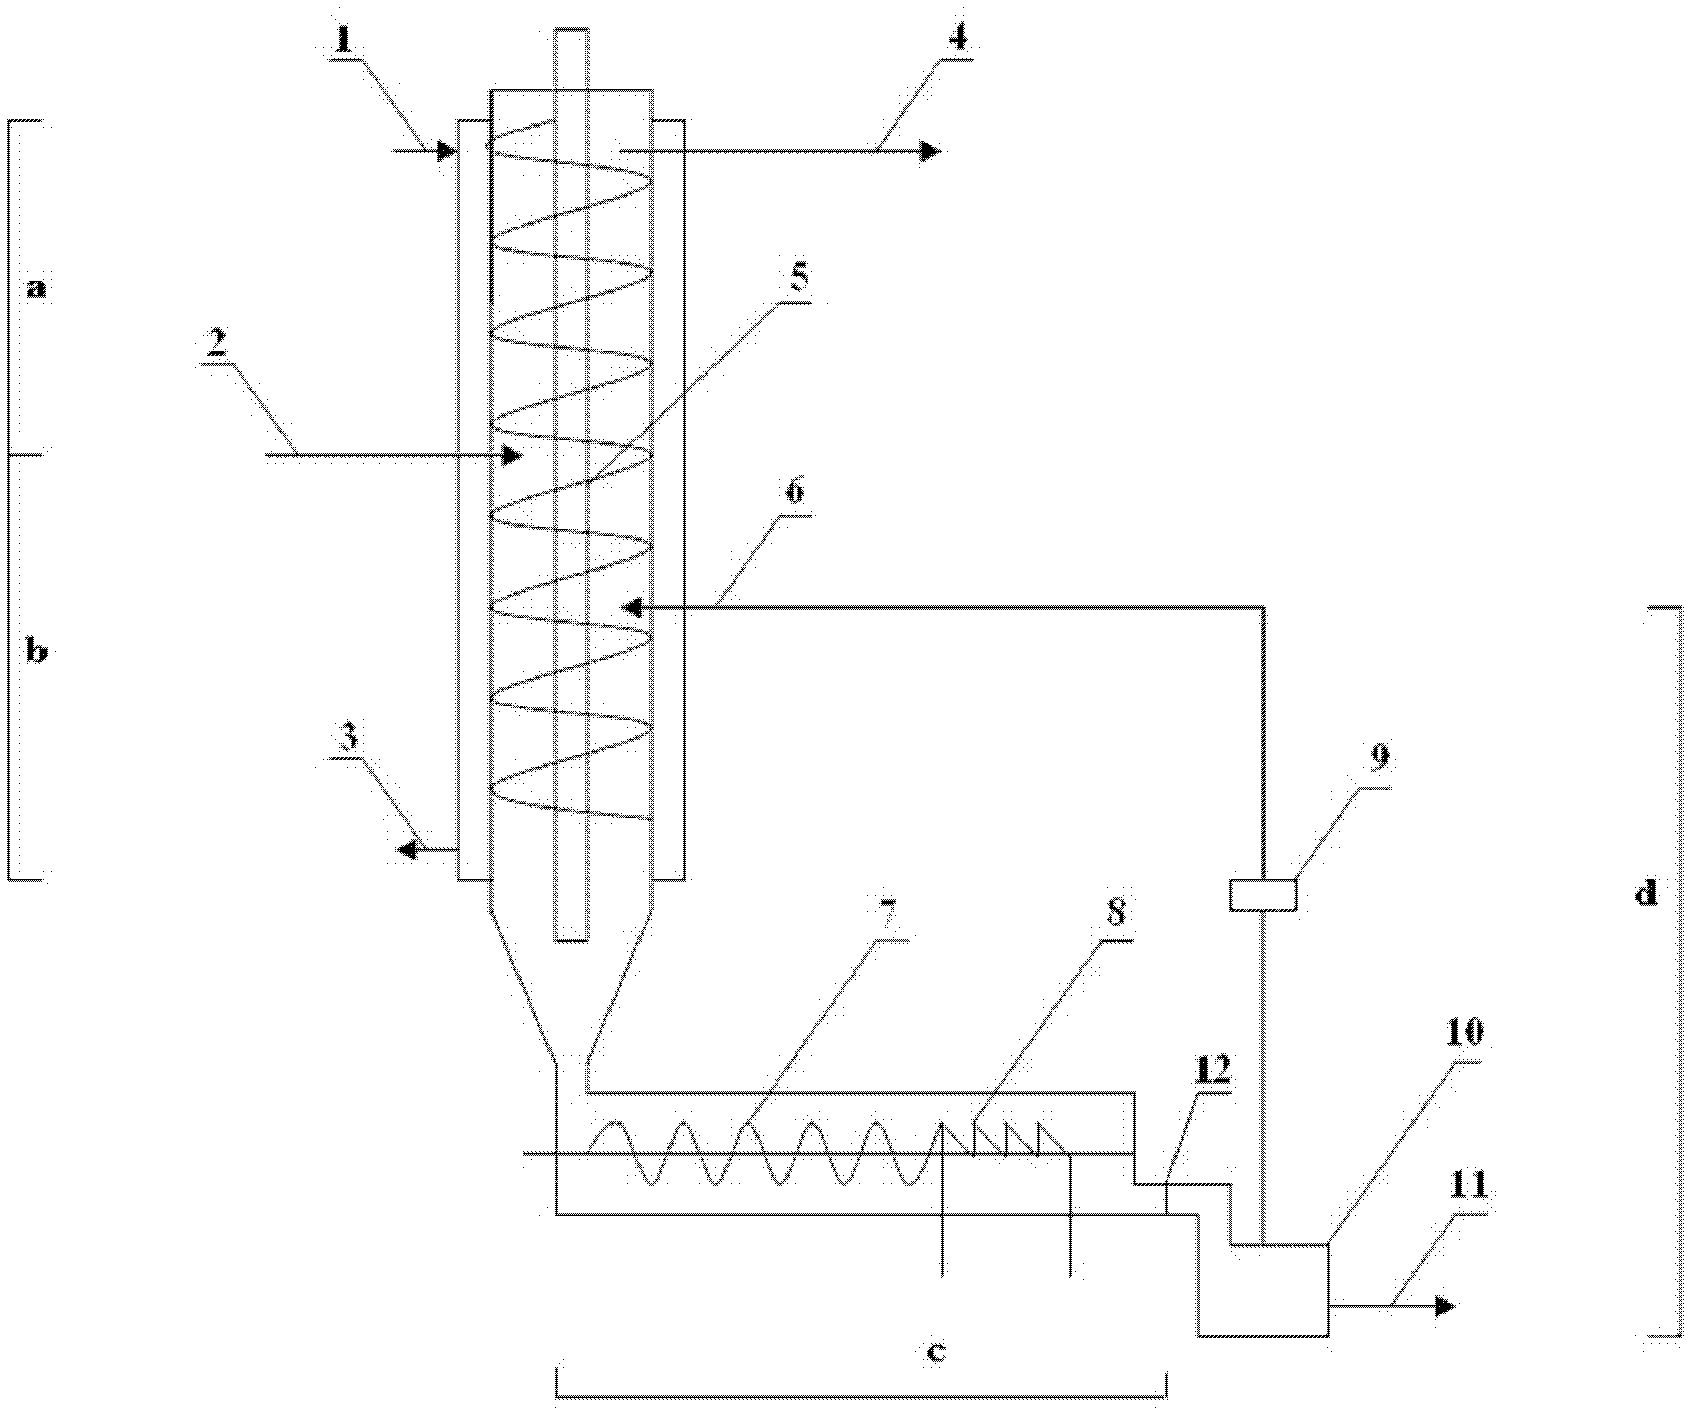 Apparatus and method for continuously separating and purifying durene